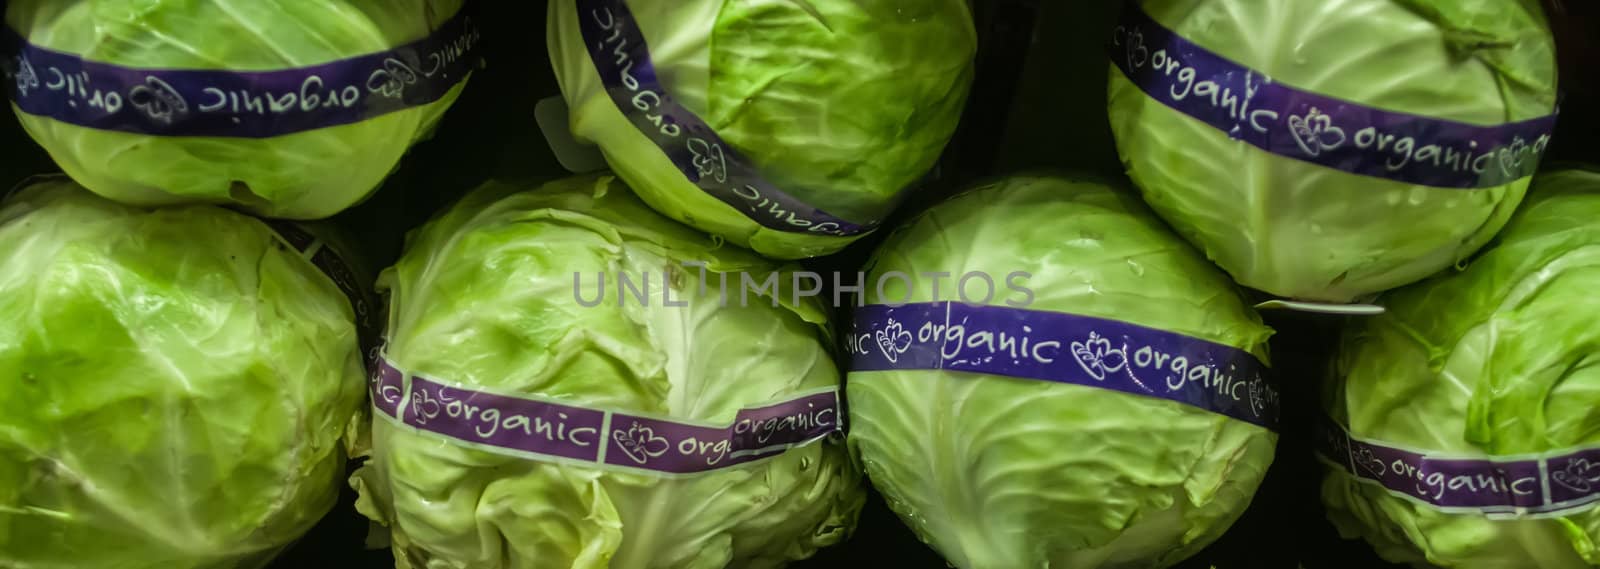 lettuce on display at farmers market by digidreamgrafix